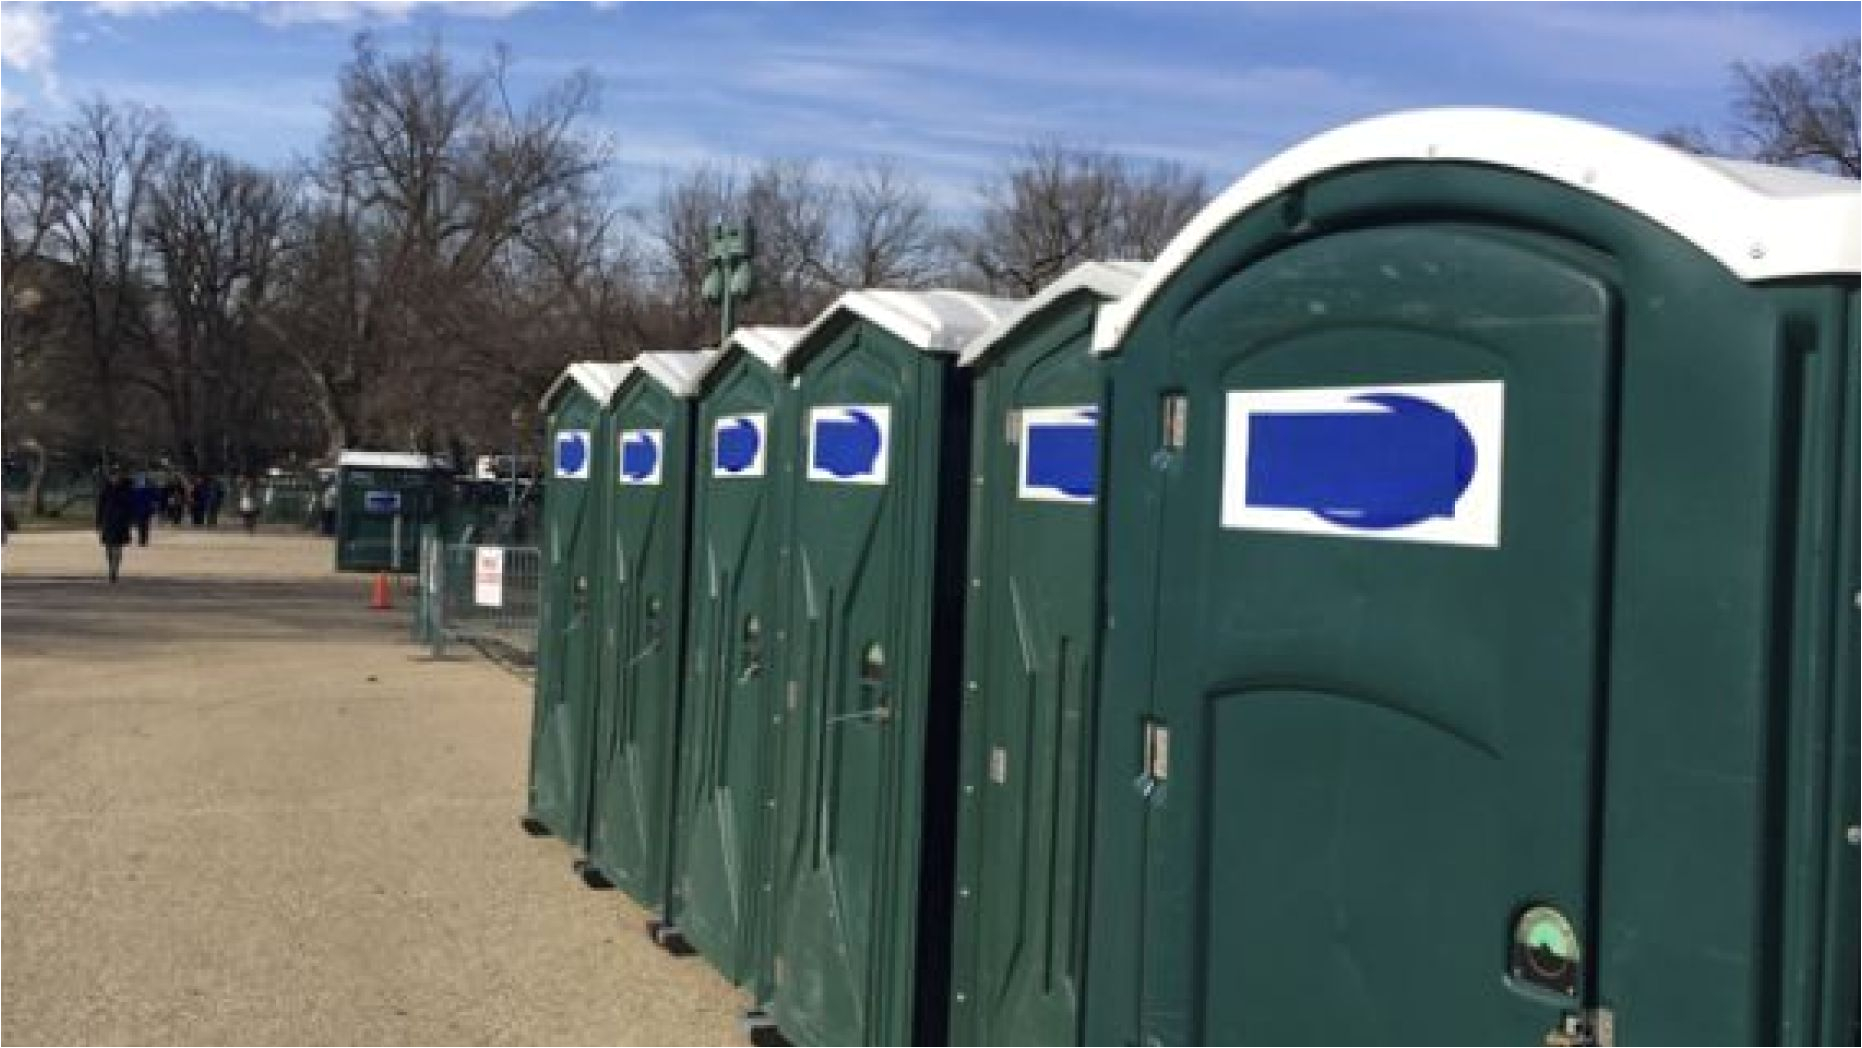 portable potty name dons johns not quite right for this inauguration day